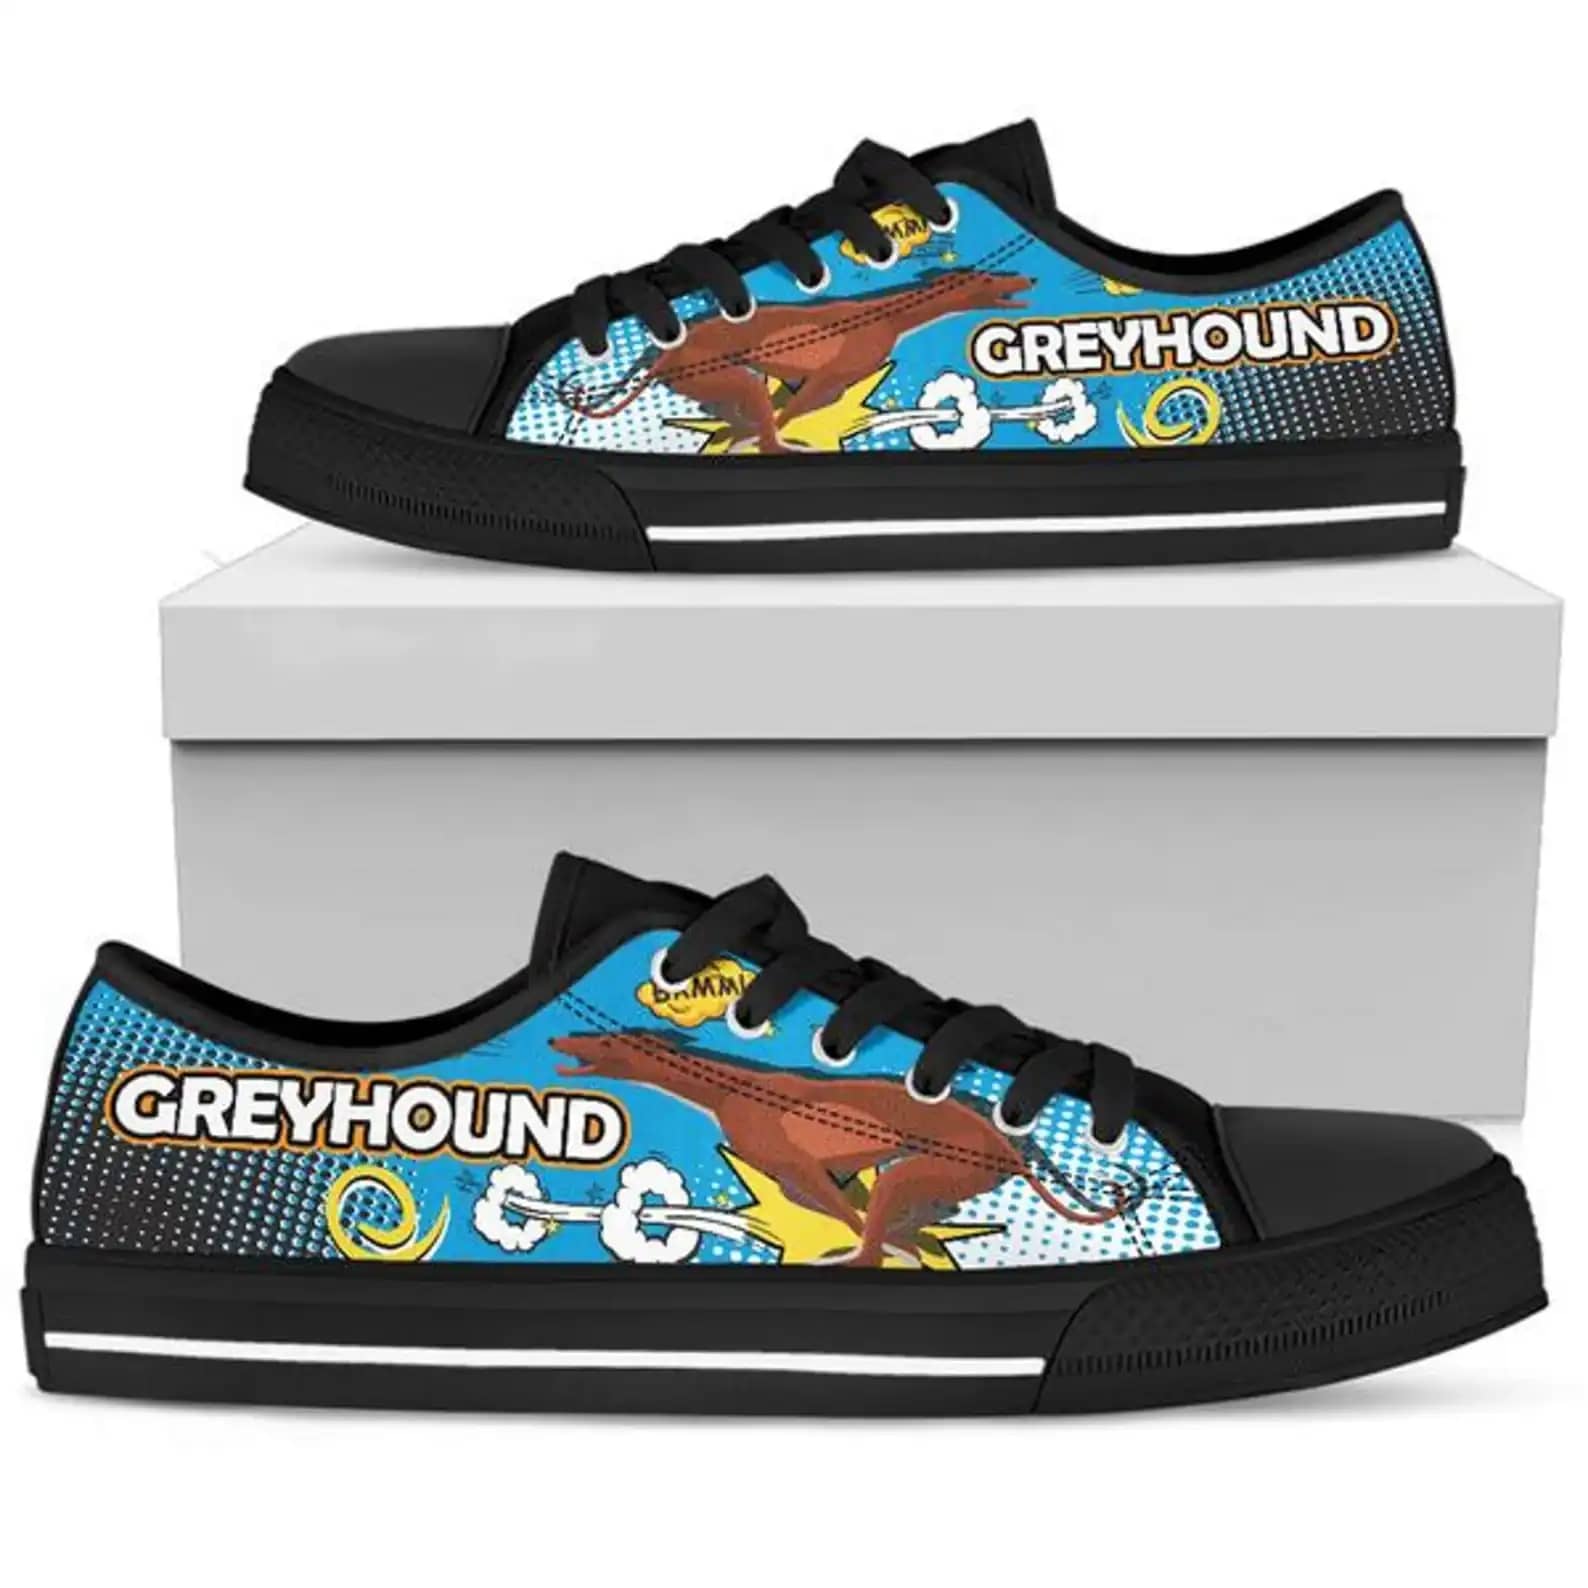 Greyhound Art Summer Shoes Low Top Sneakers